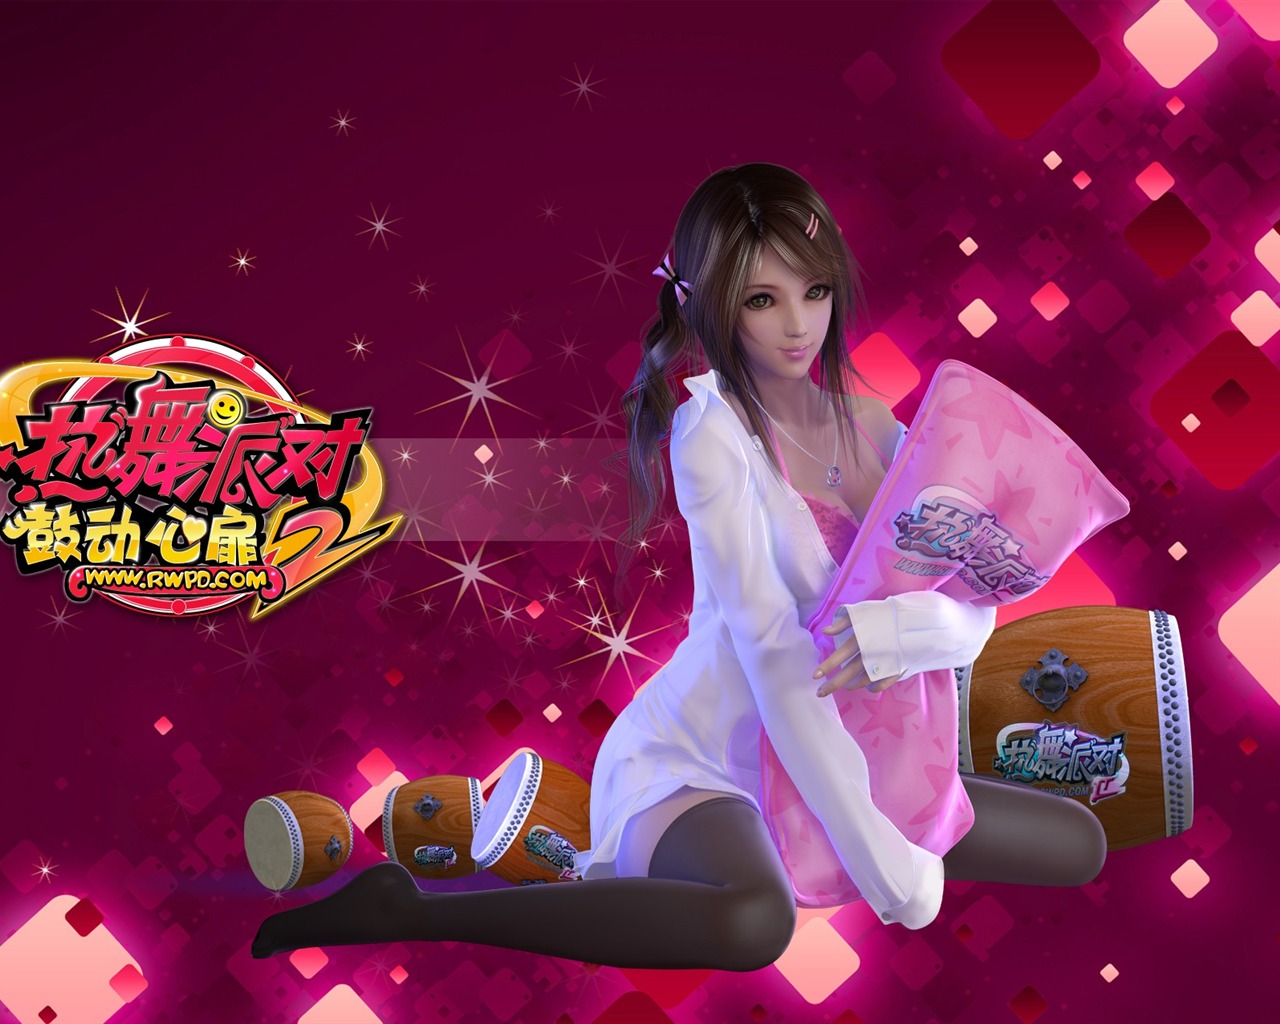 Online game Hot Dance Party II official wallpapers #11 - 1280x1024